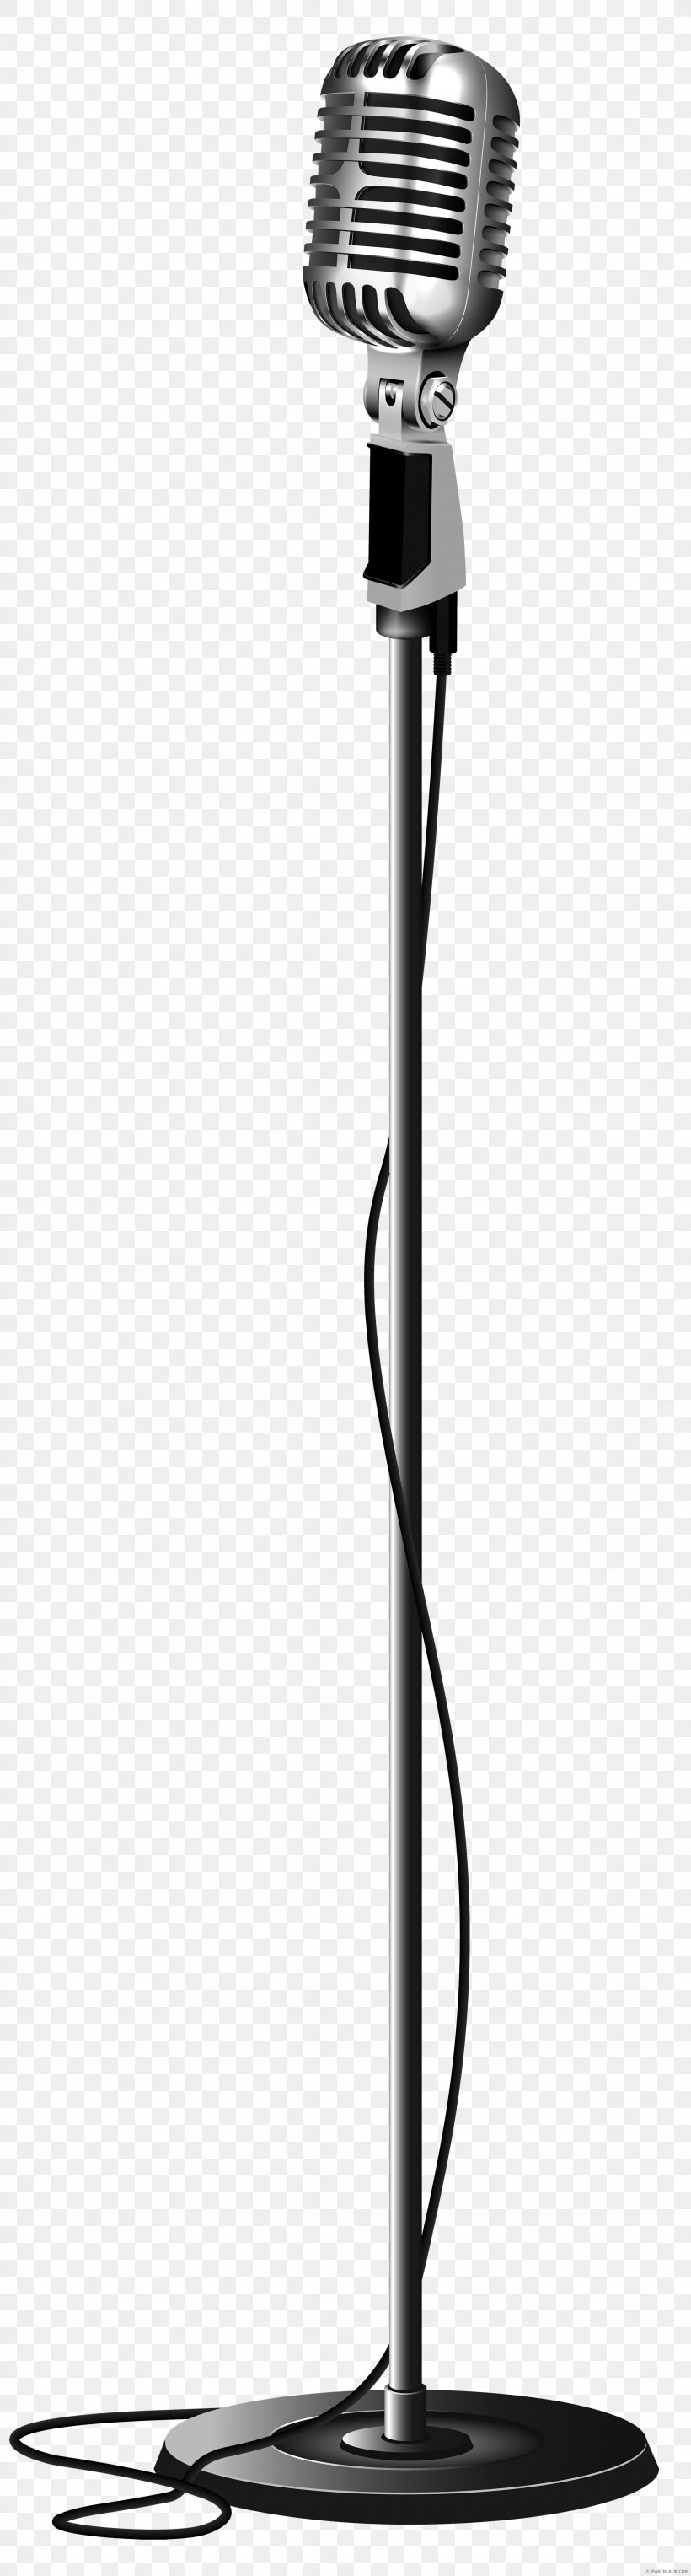 Microphone Image Clip Art Vector Graphics, PNG, 2147x8000px, Microphone, Art, Audio, Audio Equipment, Black And White Download Free